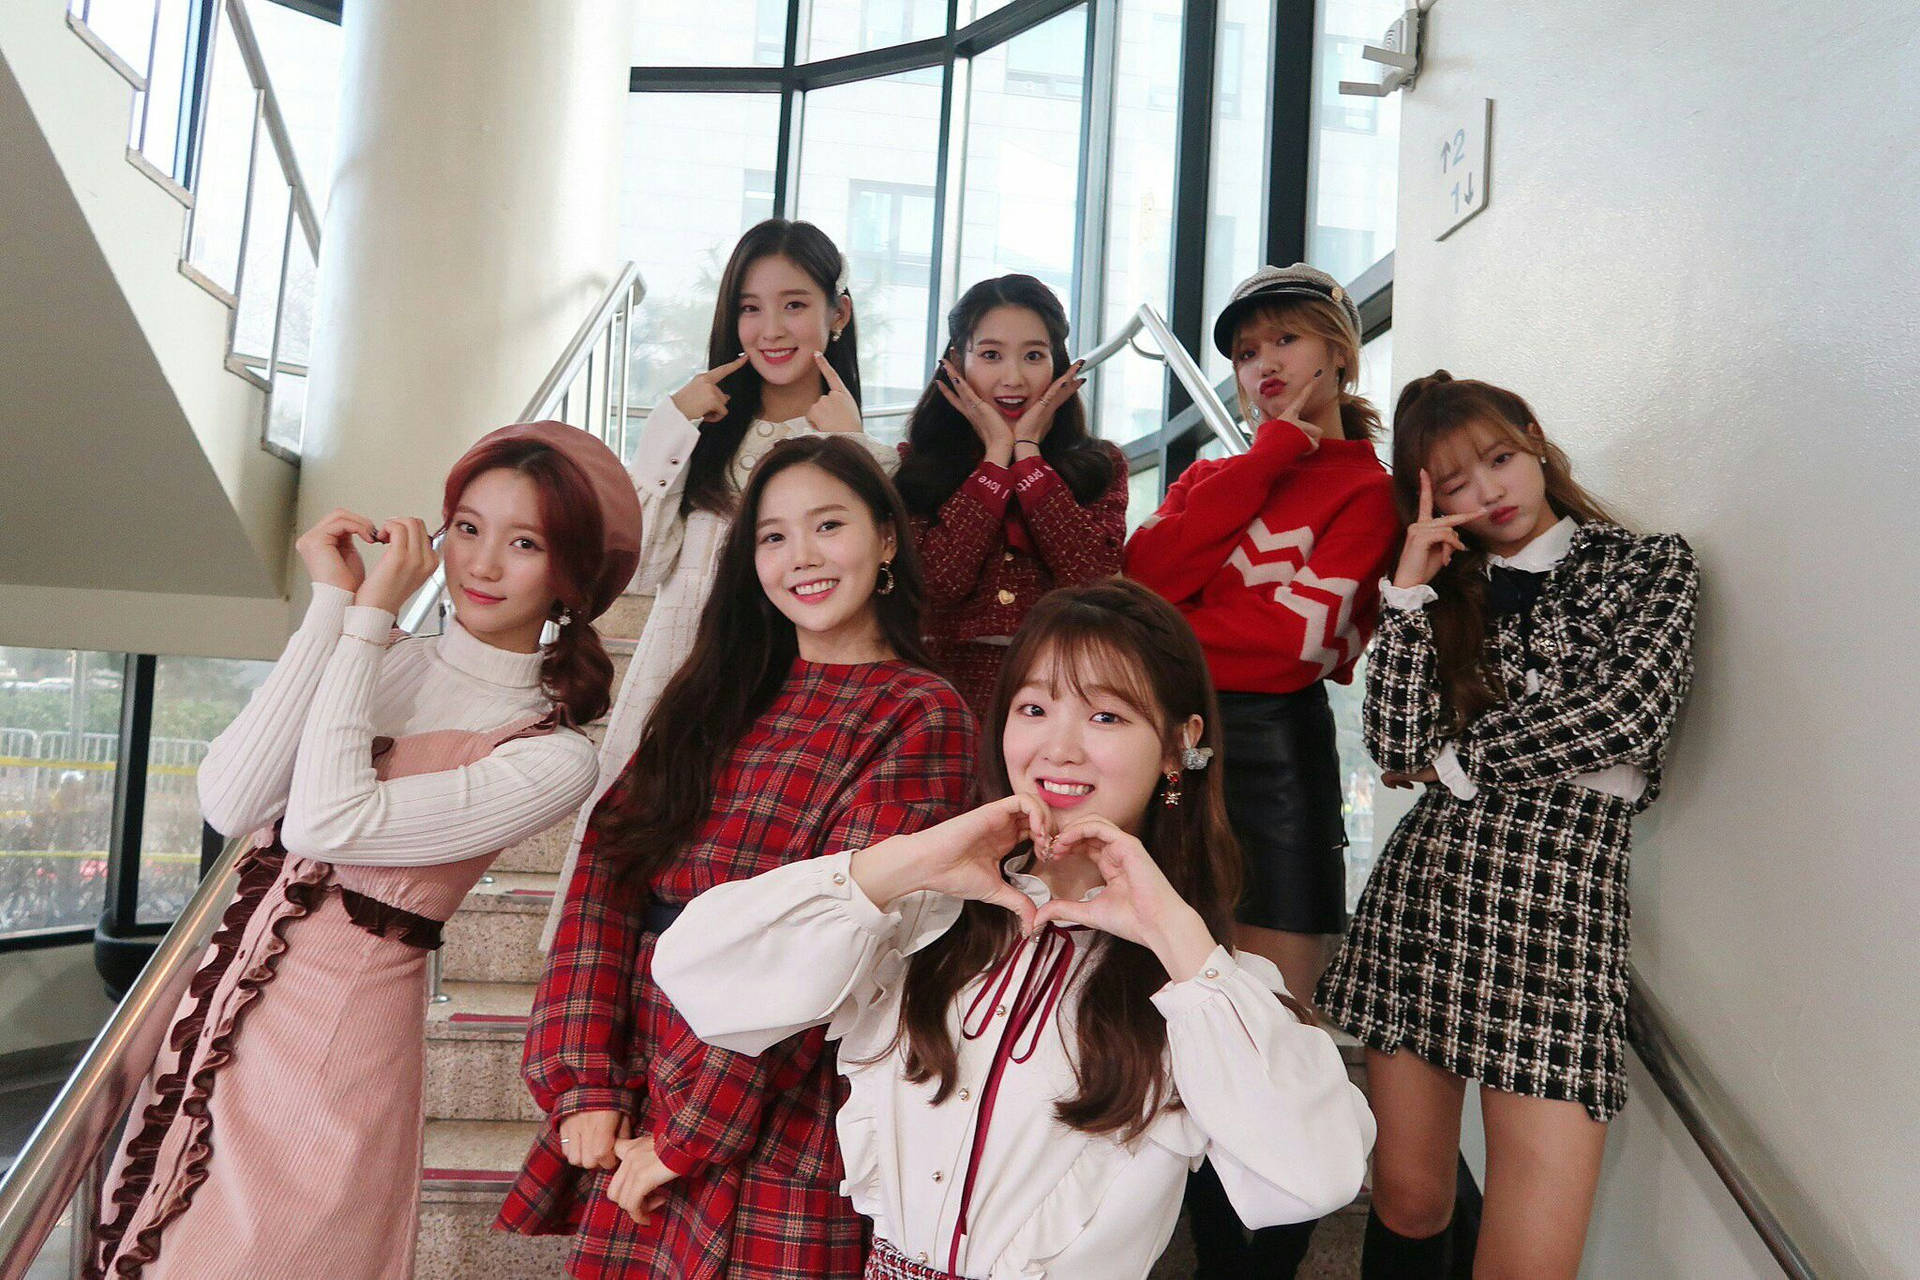 South Korean Pop Sensation Oh My Girl In A Candid Group Photo